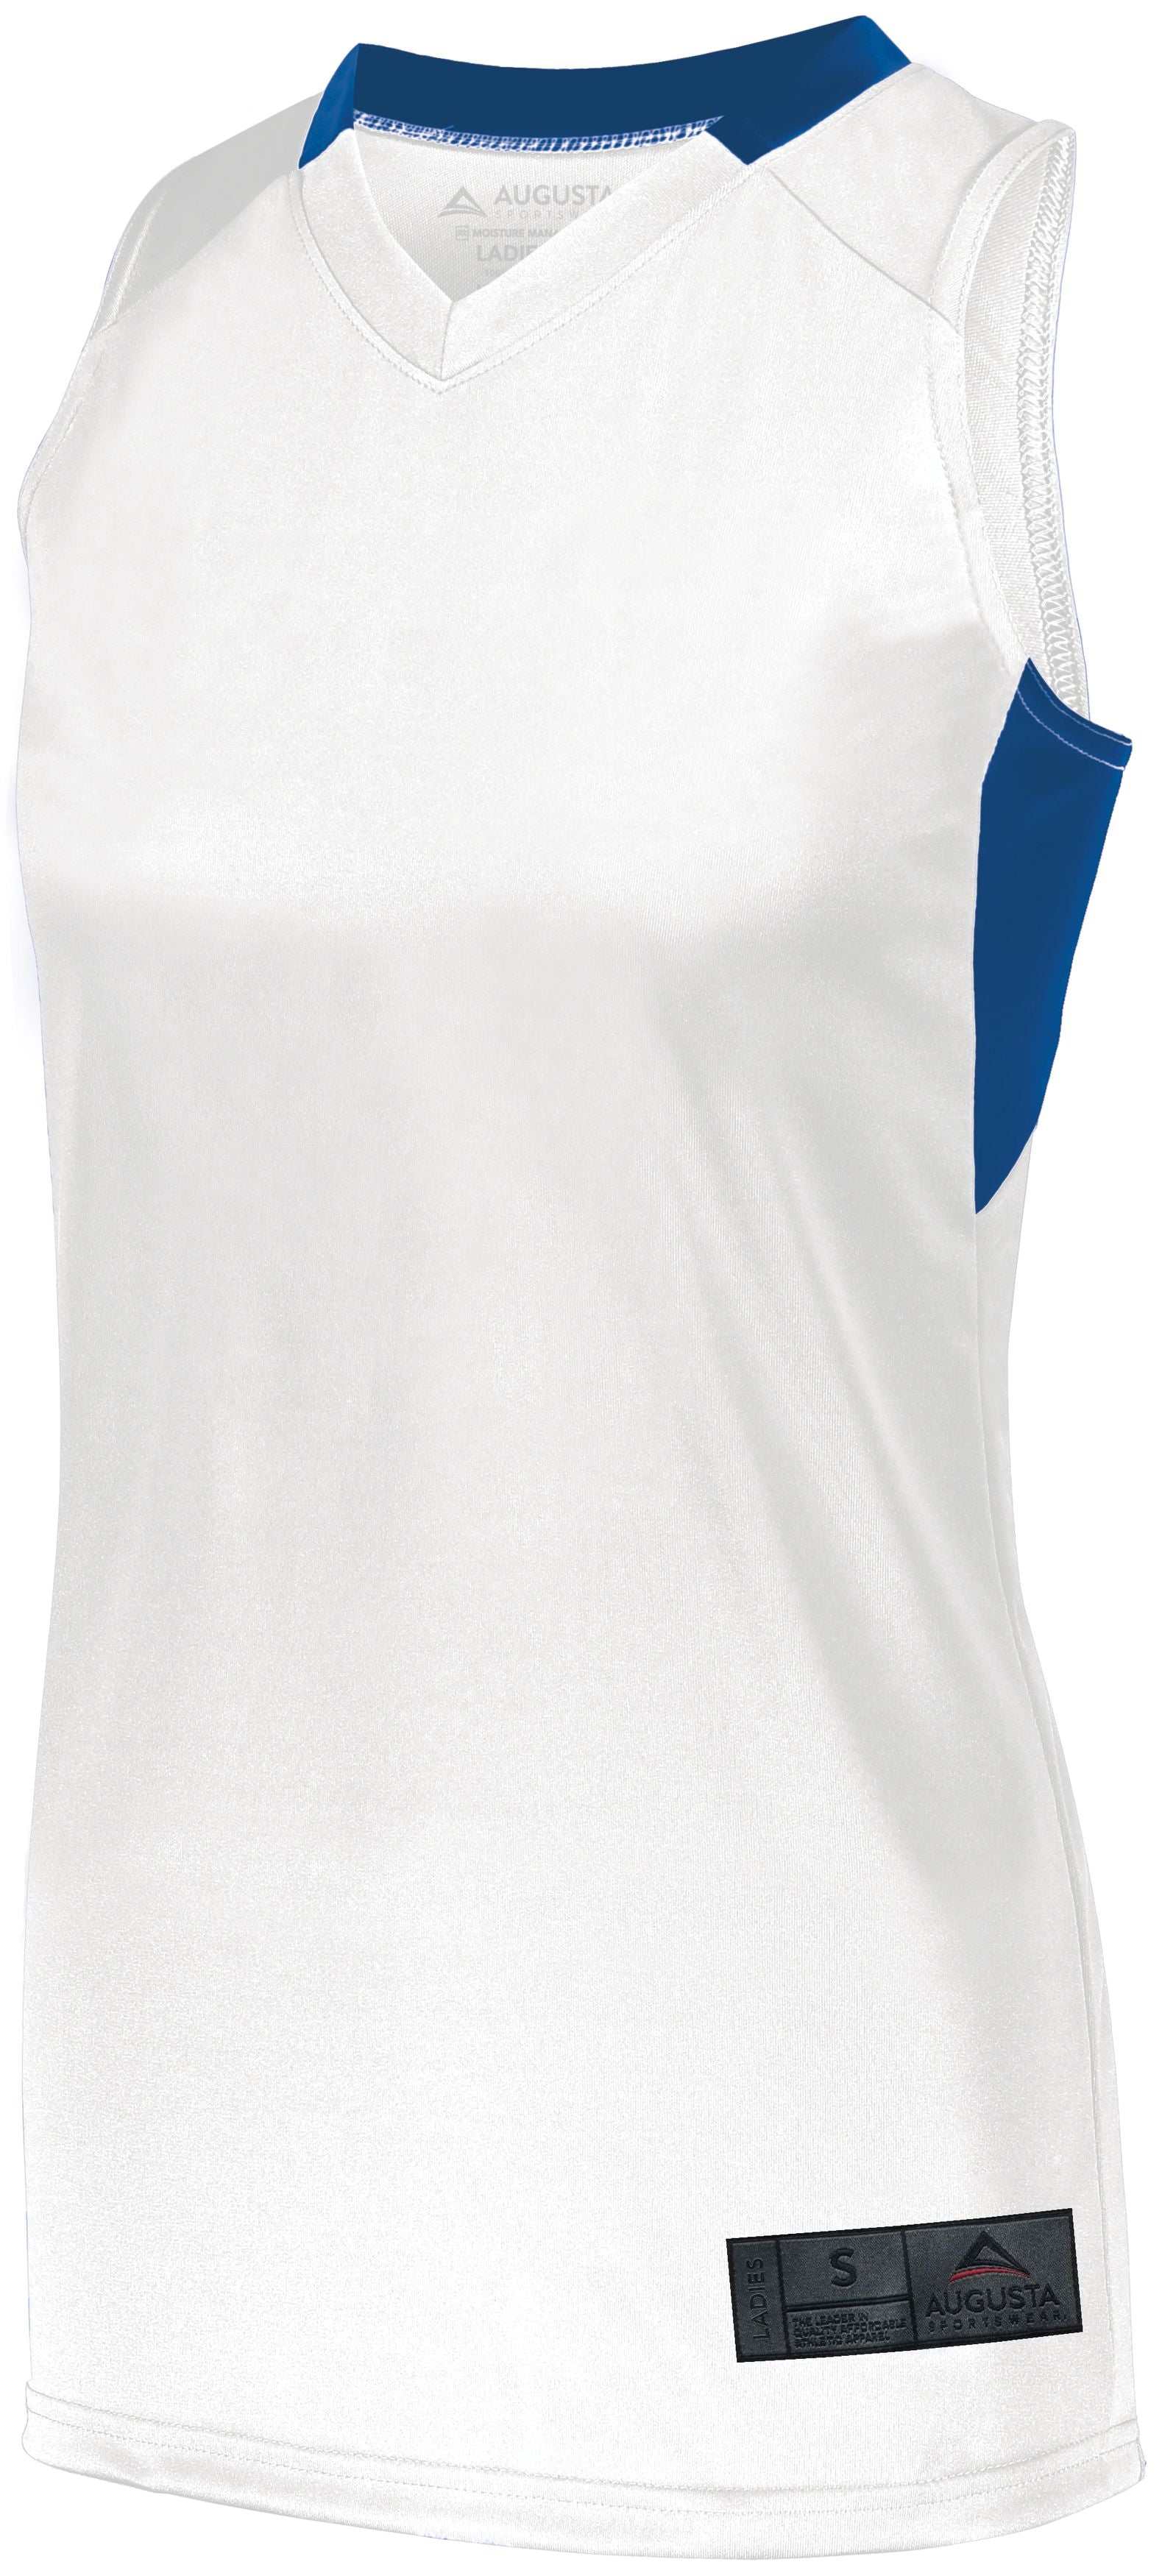 Augusta Sportswear Ladies Step-Back Basketball Jersey in White/Royal  -Part of the Ladies, Ladies-Jersey, Augusta-Products, Basketball, Shirts, All-Sports, All-Sports-1 product lines at KanaleyCreations.com